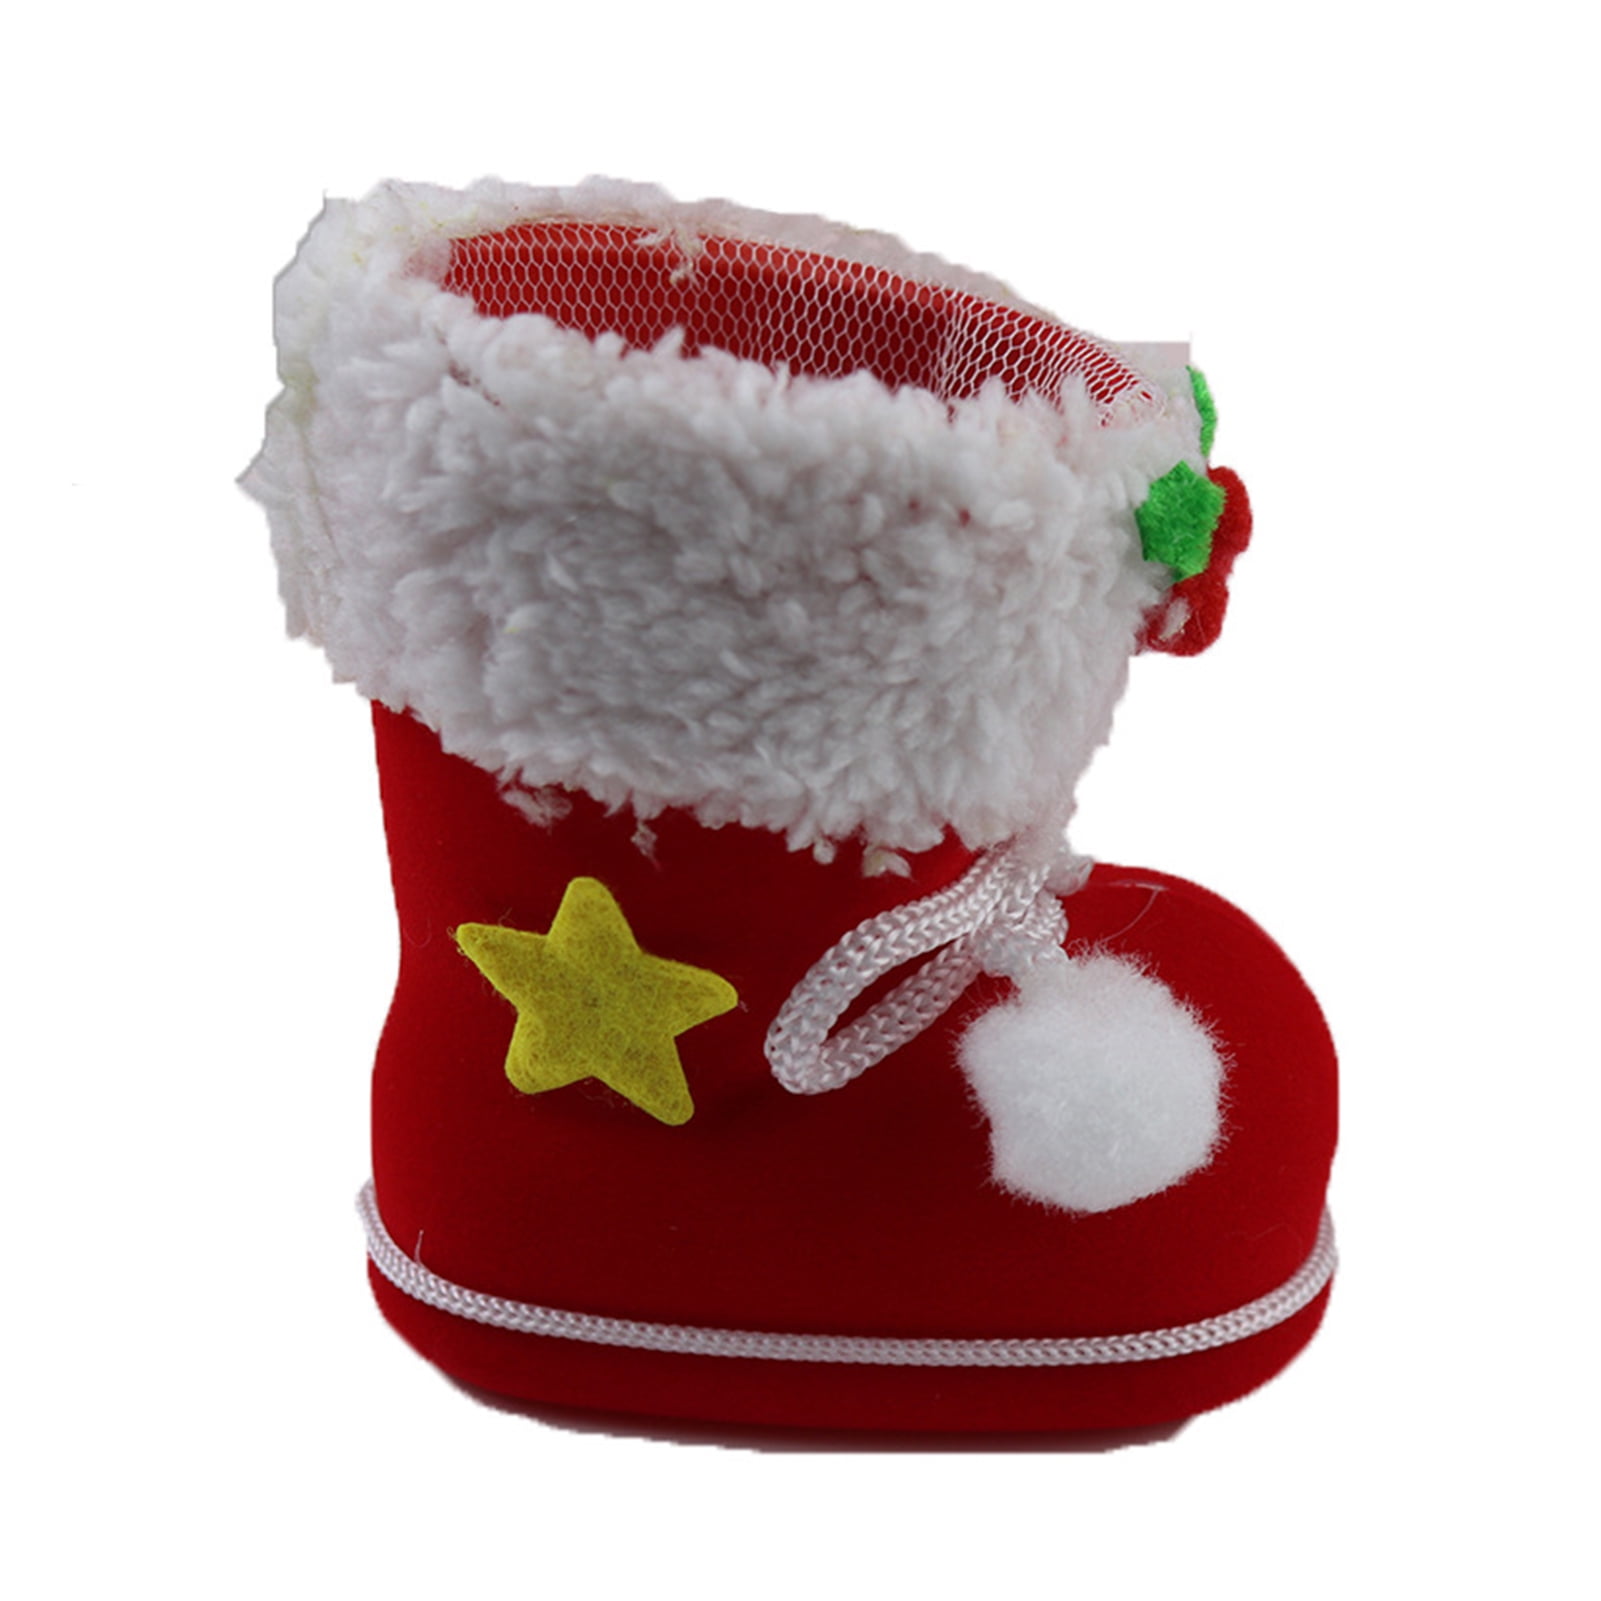 Creative Candy Box Christmas Candy Boots Santa Claus Boots Stockings Decorative Candy Gift Box Festival Decoration Accessory-Red 